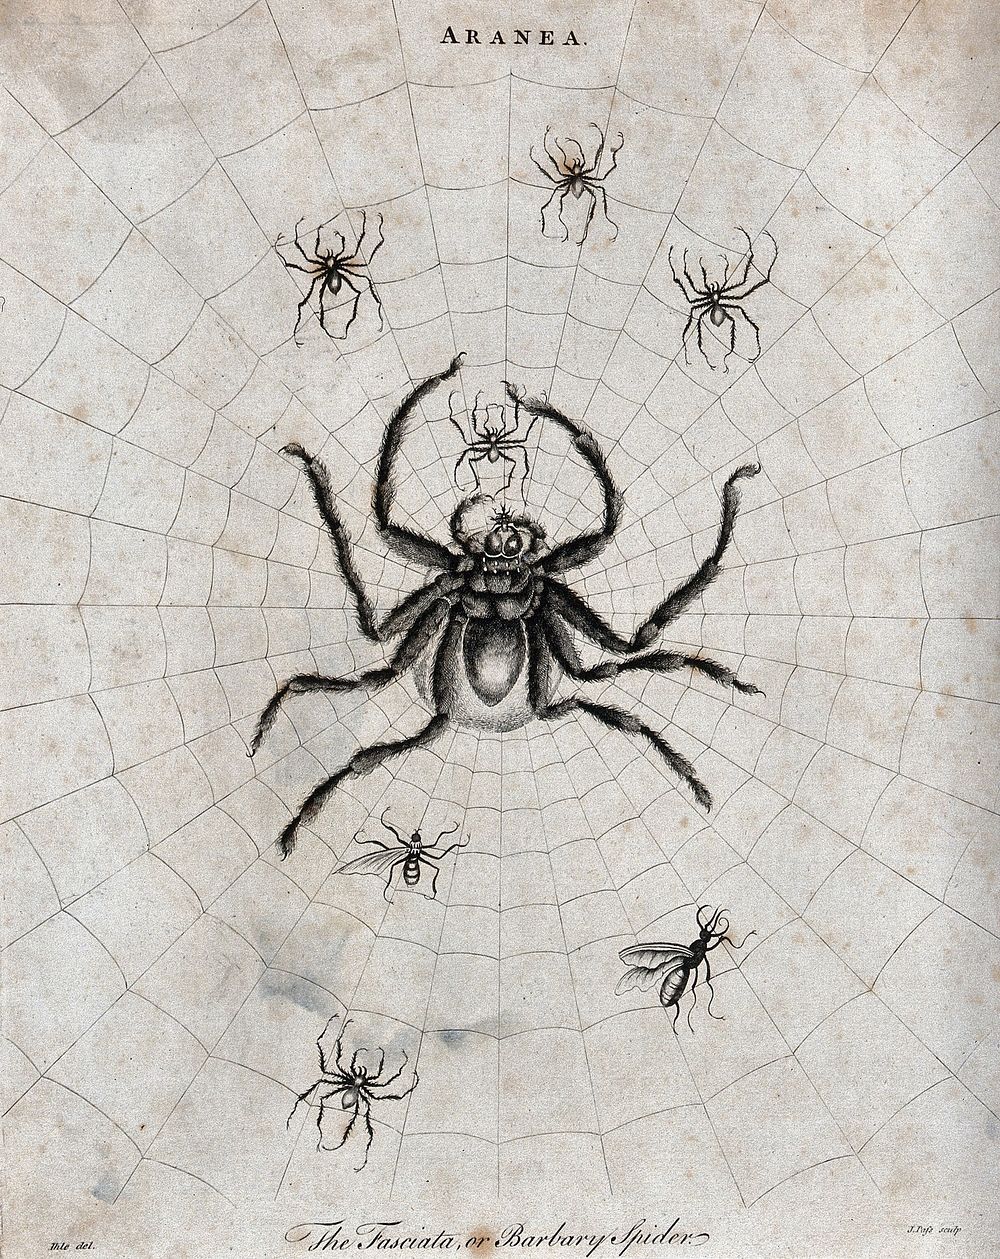 A large barbary spider with her young in her web. Etching by J. Pass, ca. 1796, after J. E. Ihle.